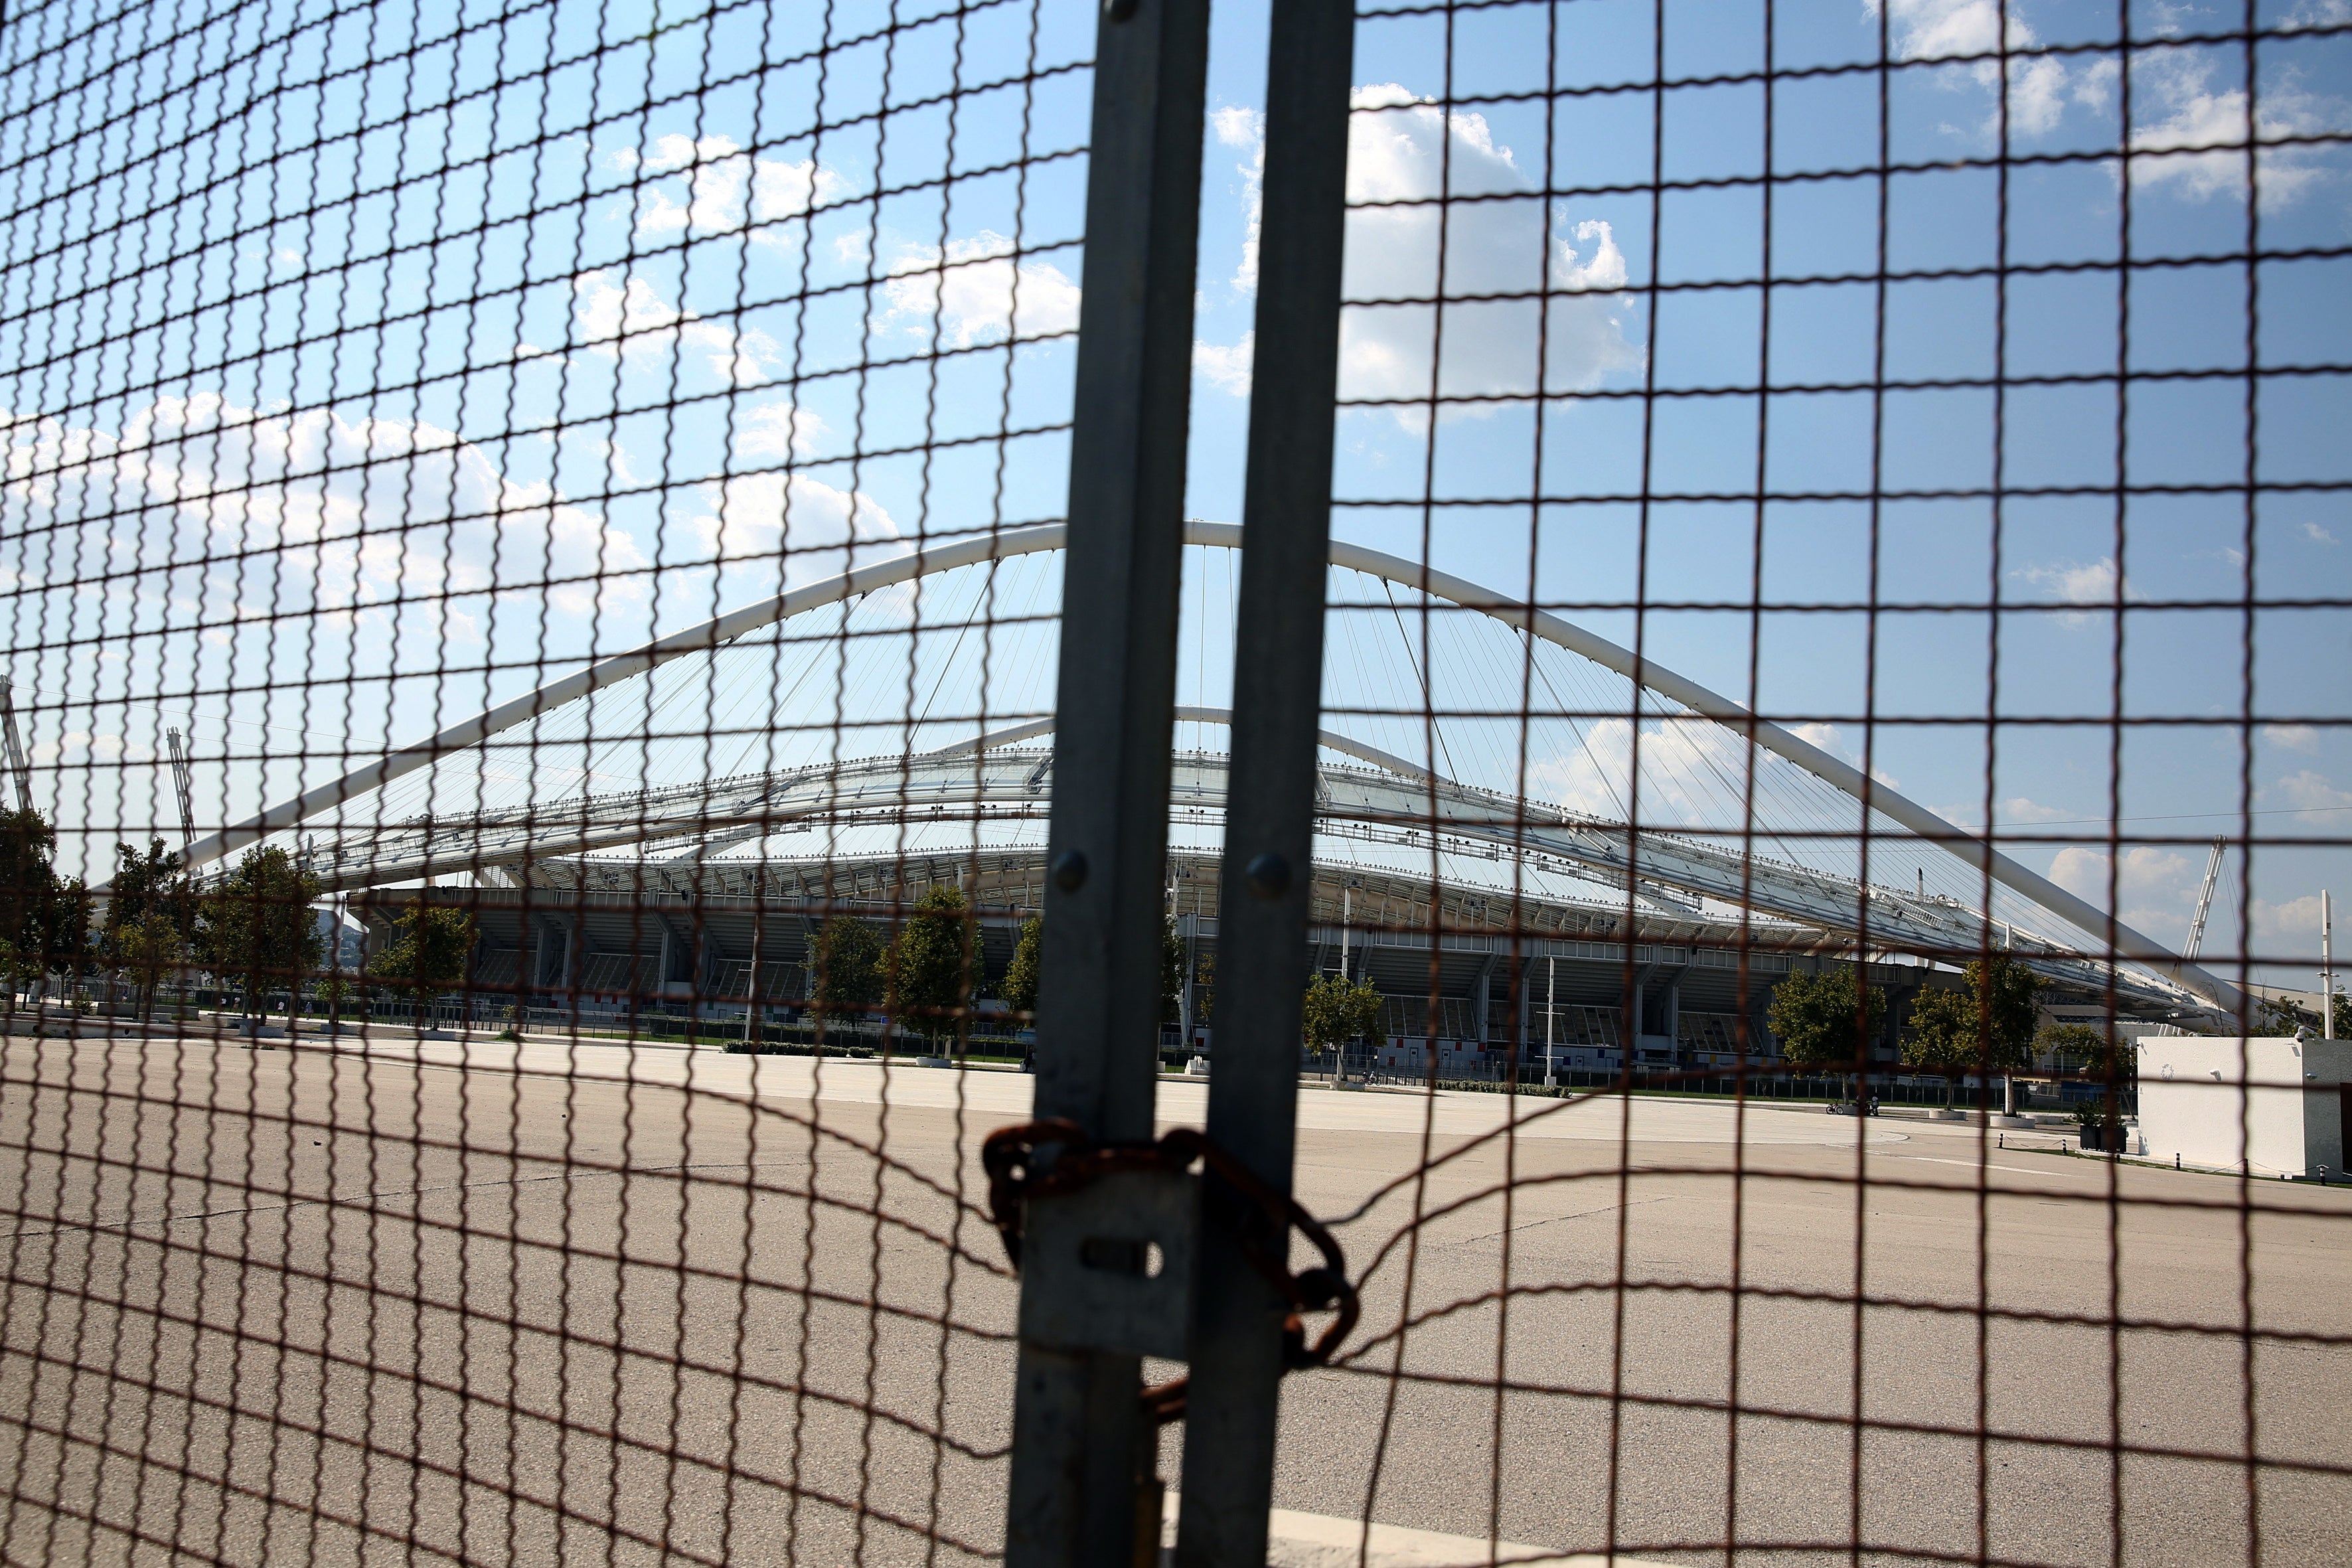 The Olympic Stadium in Athens has been shut down for the time being